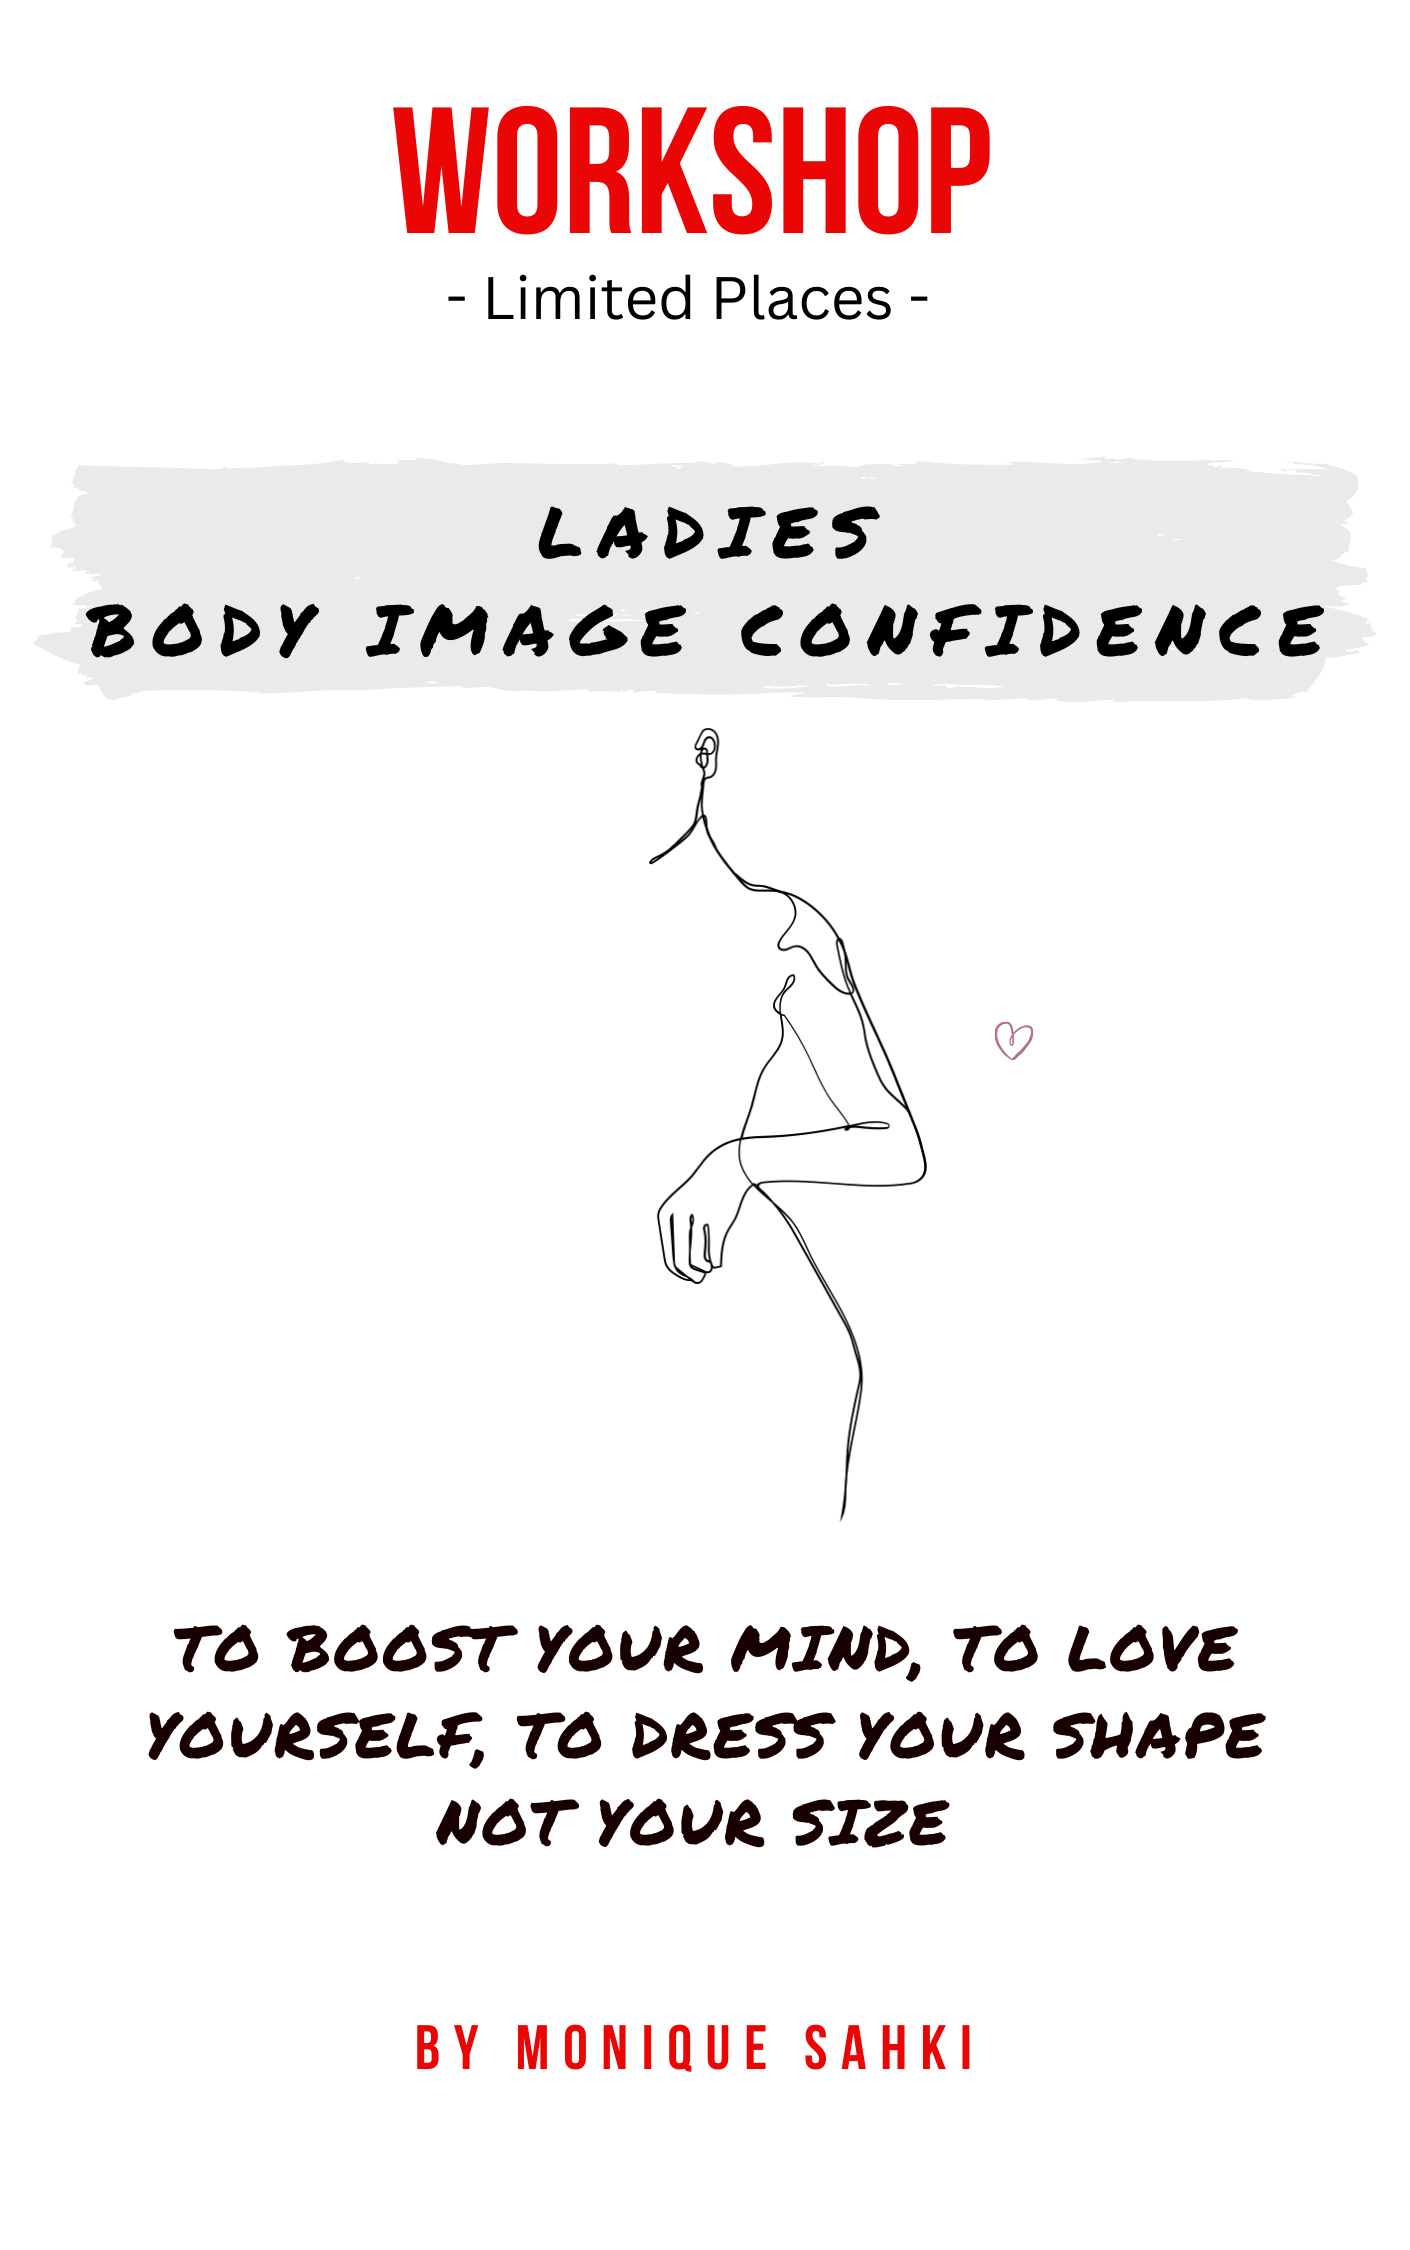 image ladies body image confidence.png